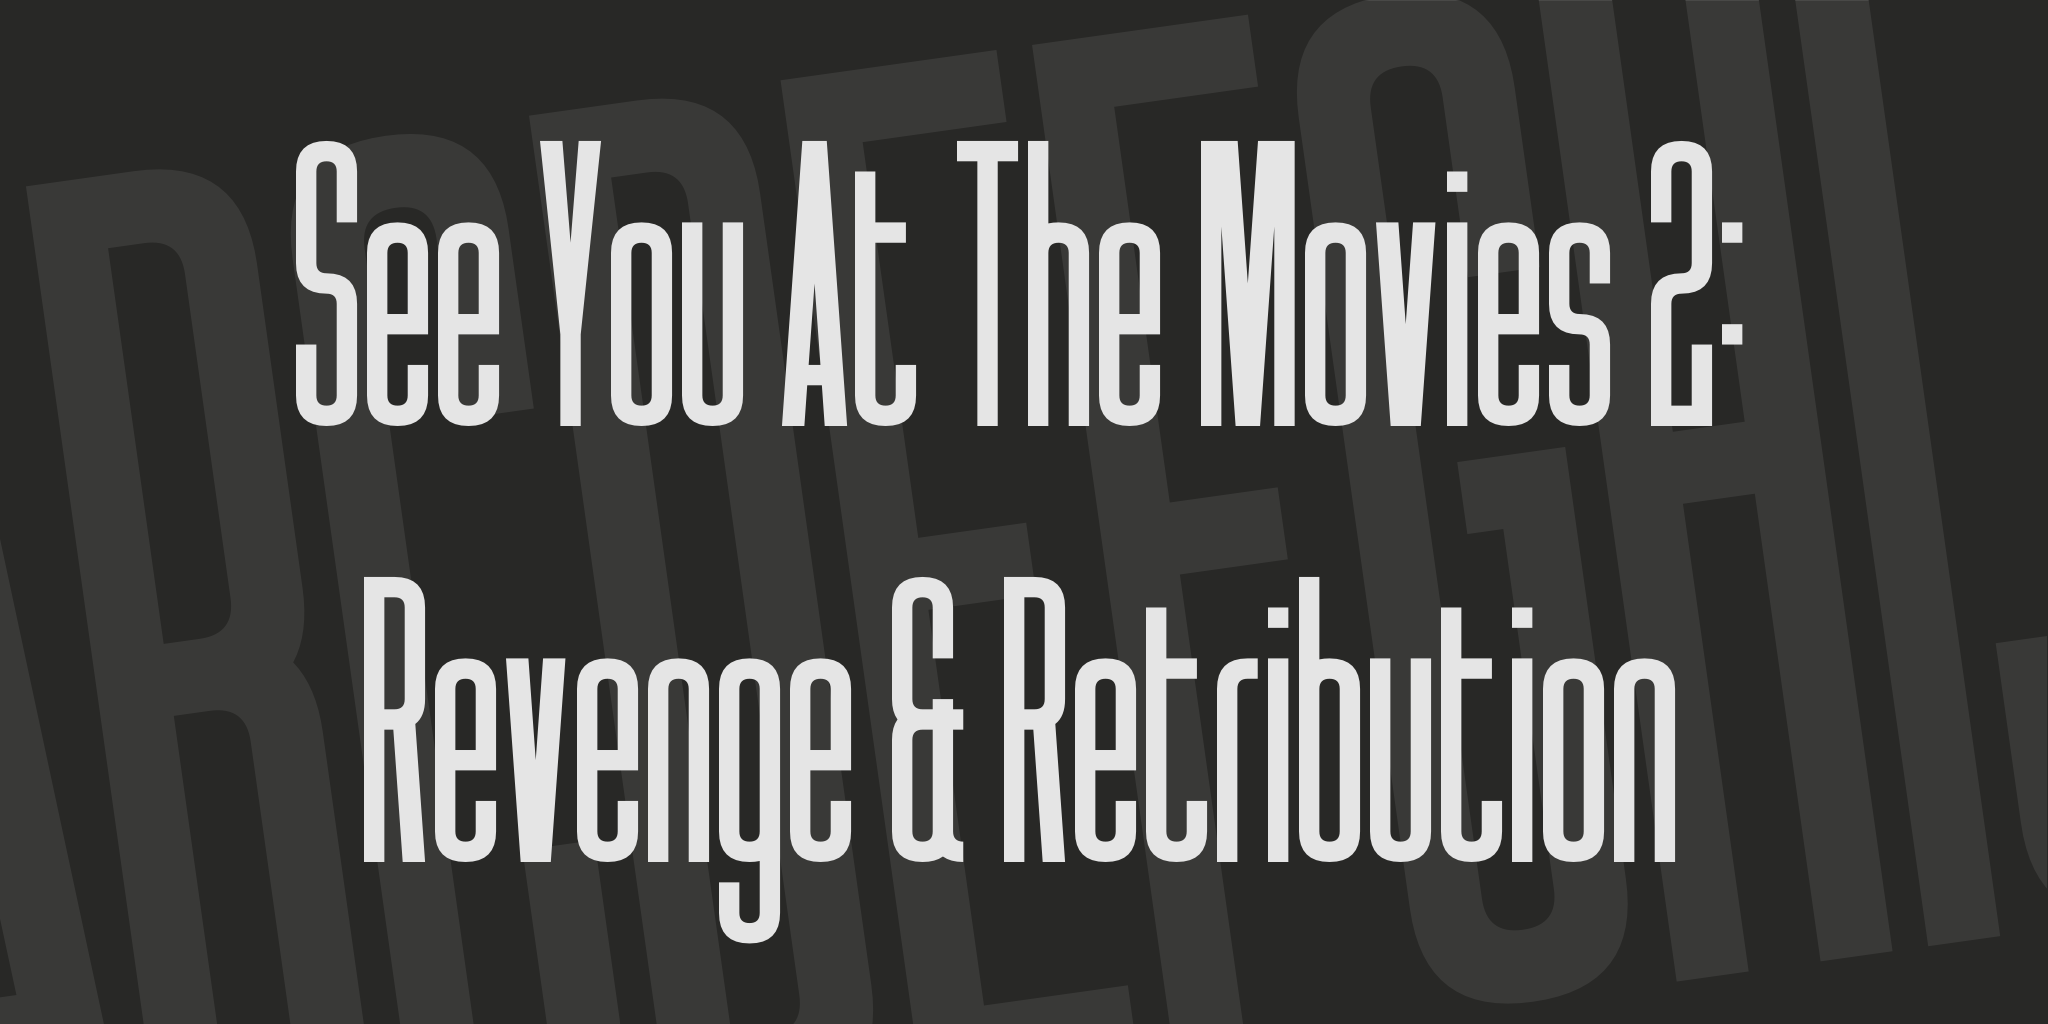 See You At The Movies 2 Revenge & Retribution